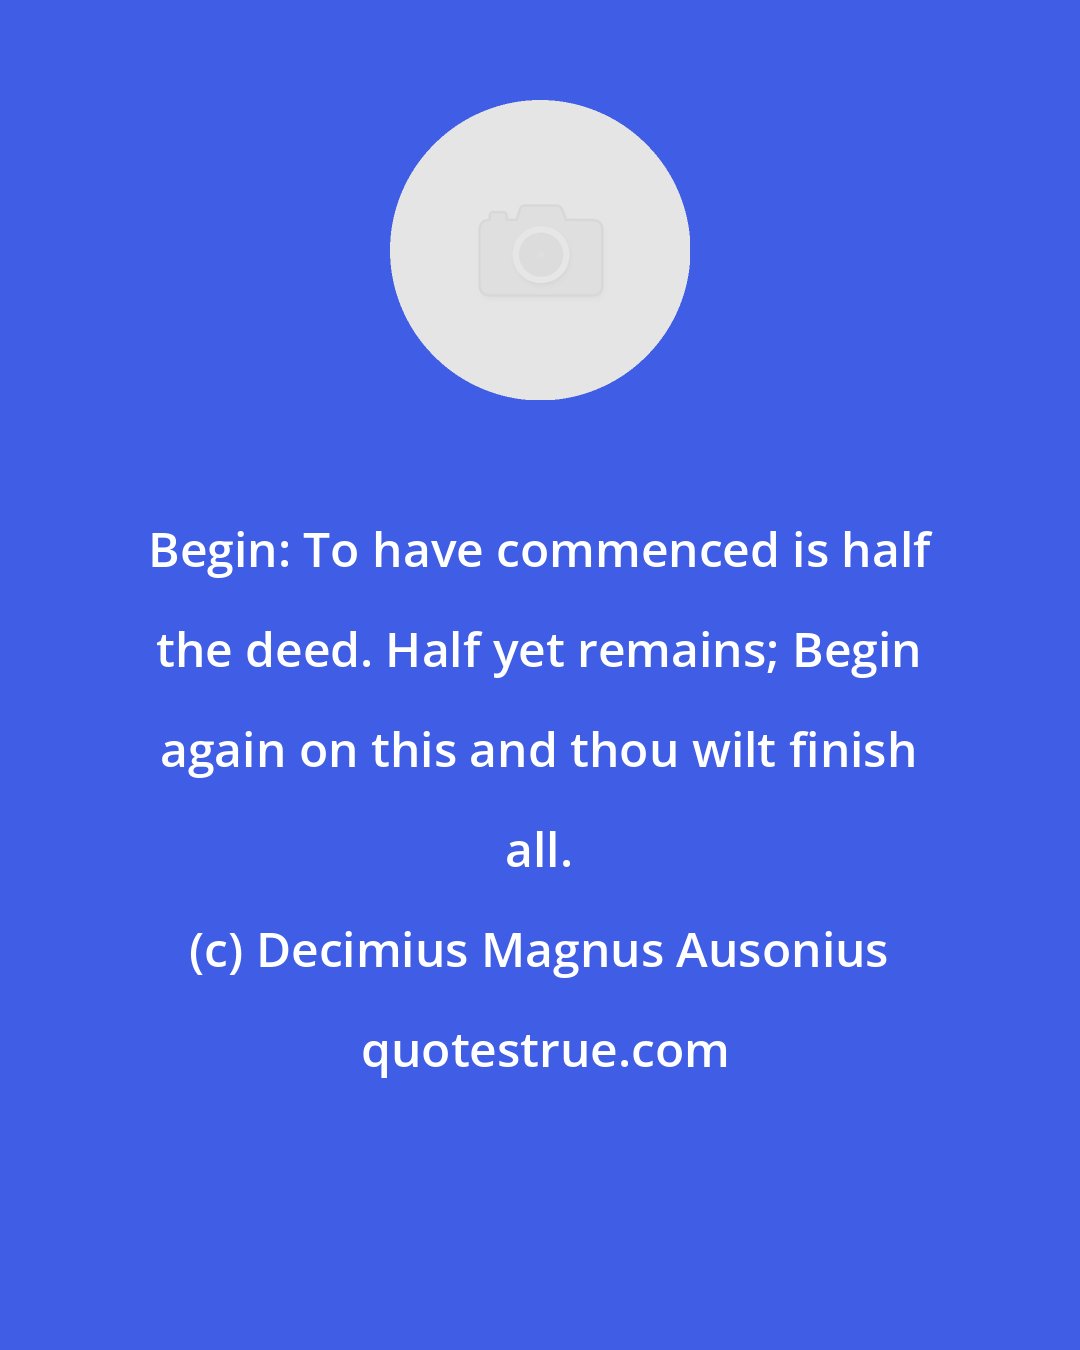 Decimius Magnus Ausonius: Begin: To have commenced is half the deed. Half yet remains; Begin again on this and thou wilt finish all.